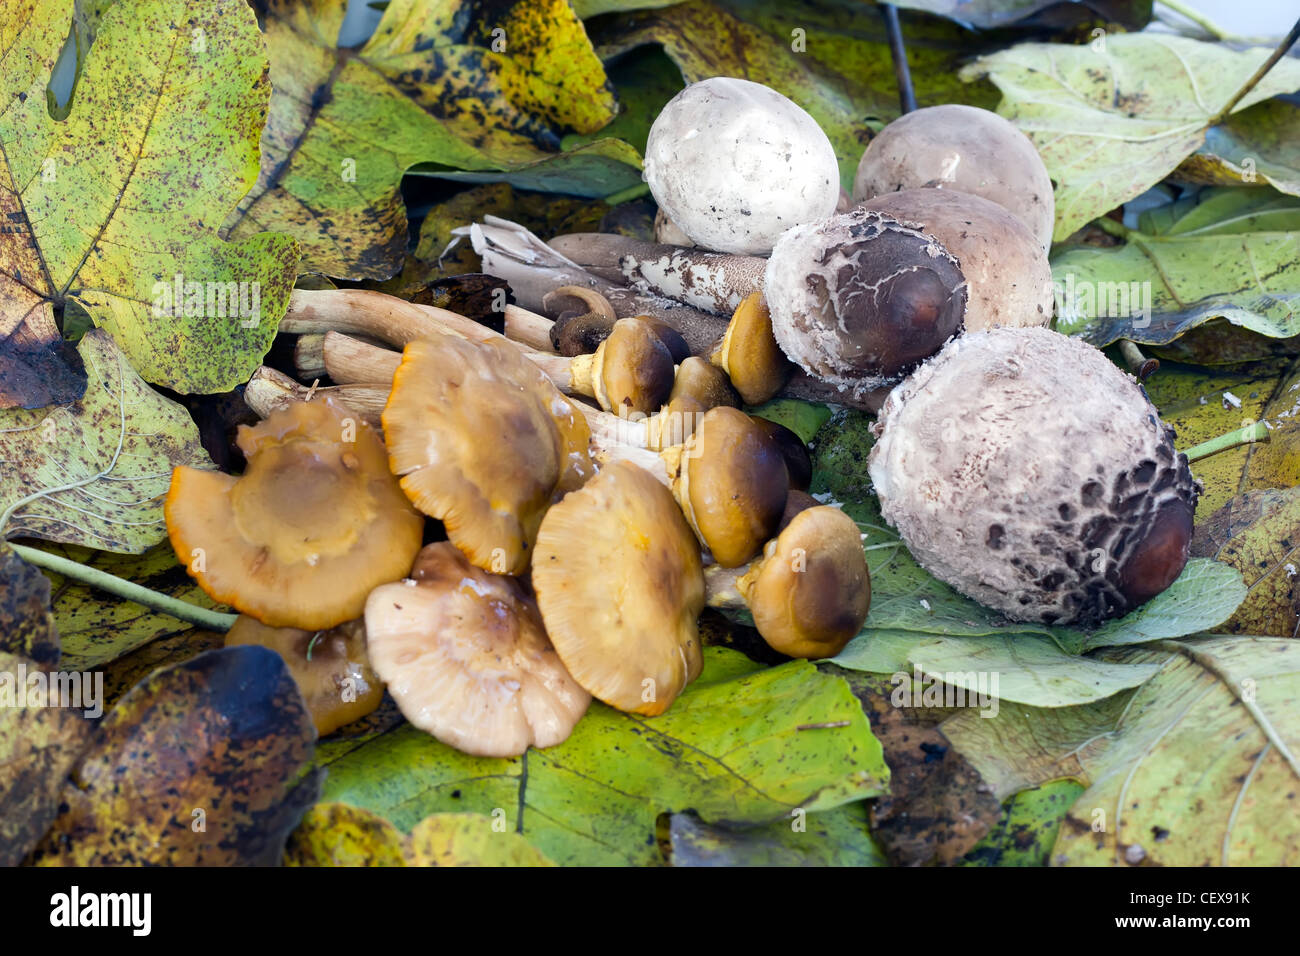 pipinky mushrooms, parasol mushroom and puffballs autumnal composition. Stock Photo